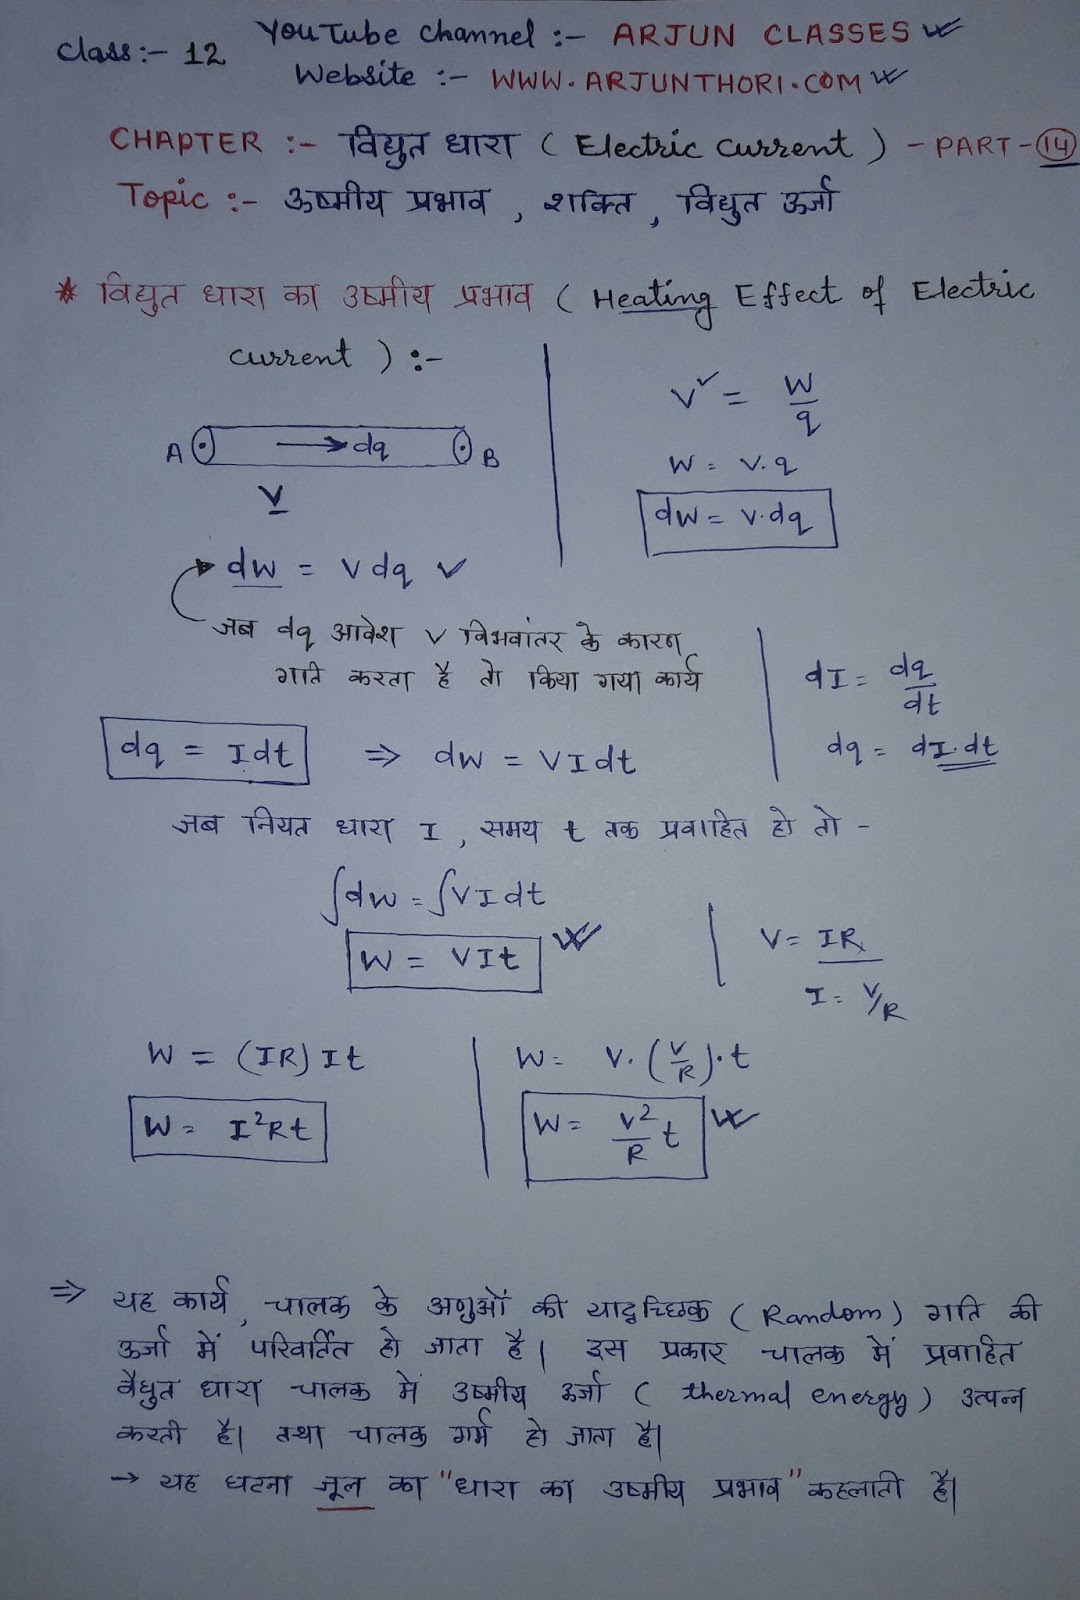 heating effect of electric current 